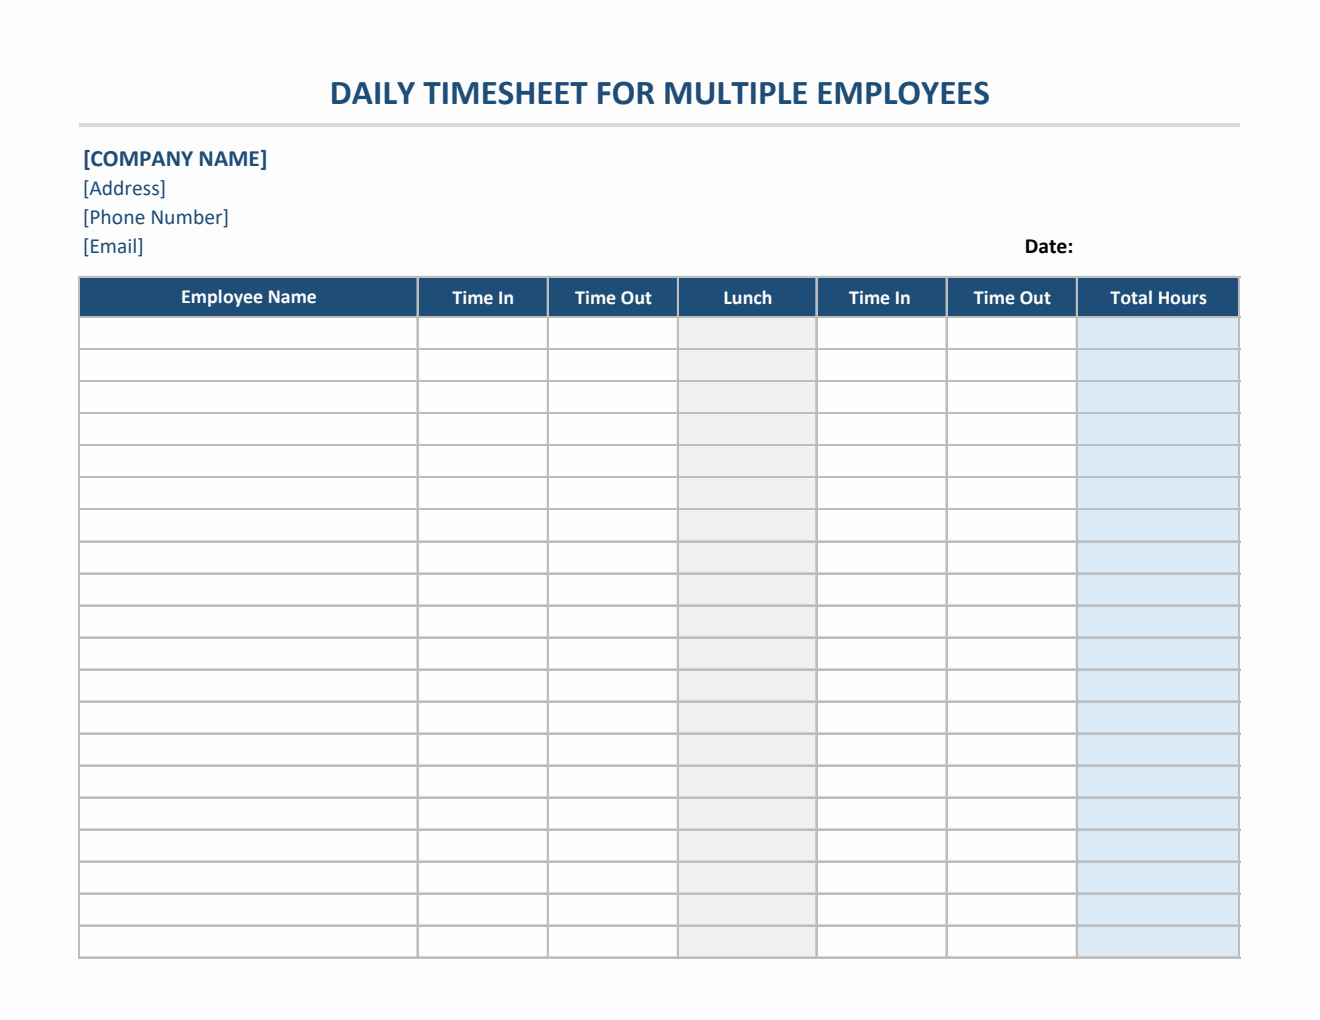  Daily Timesheet For Multiple Employees in Excel